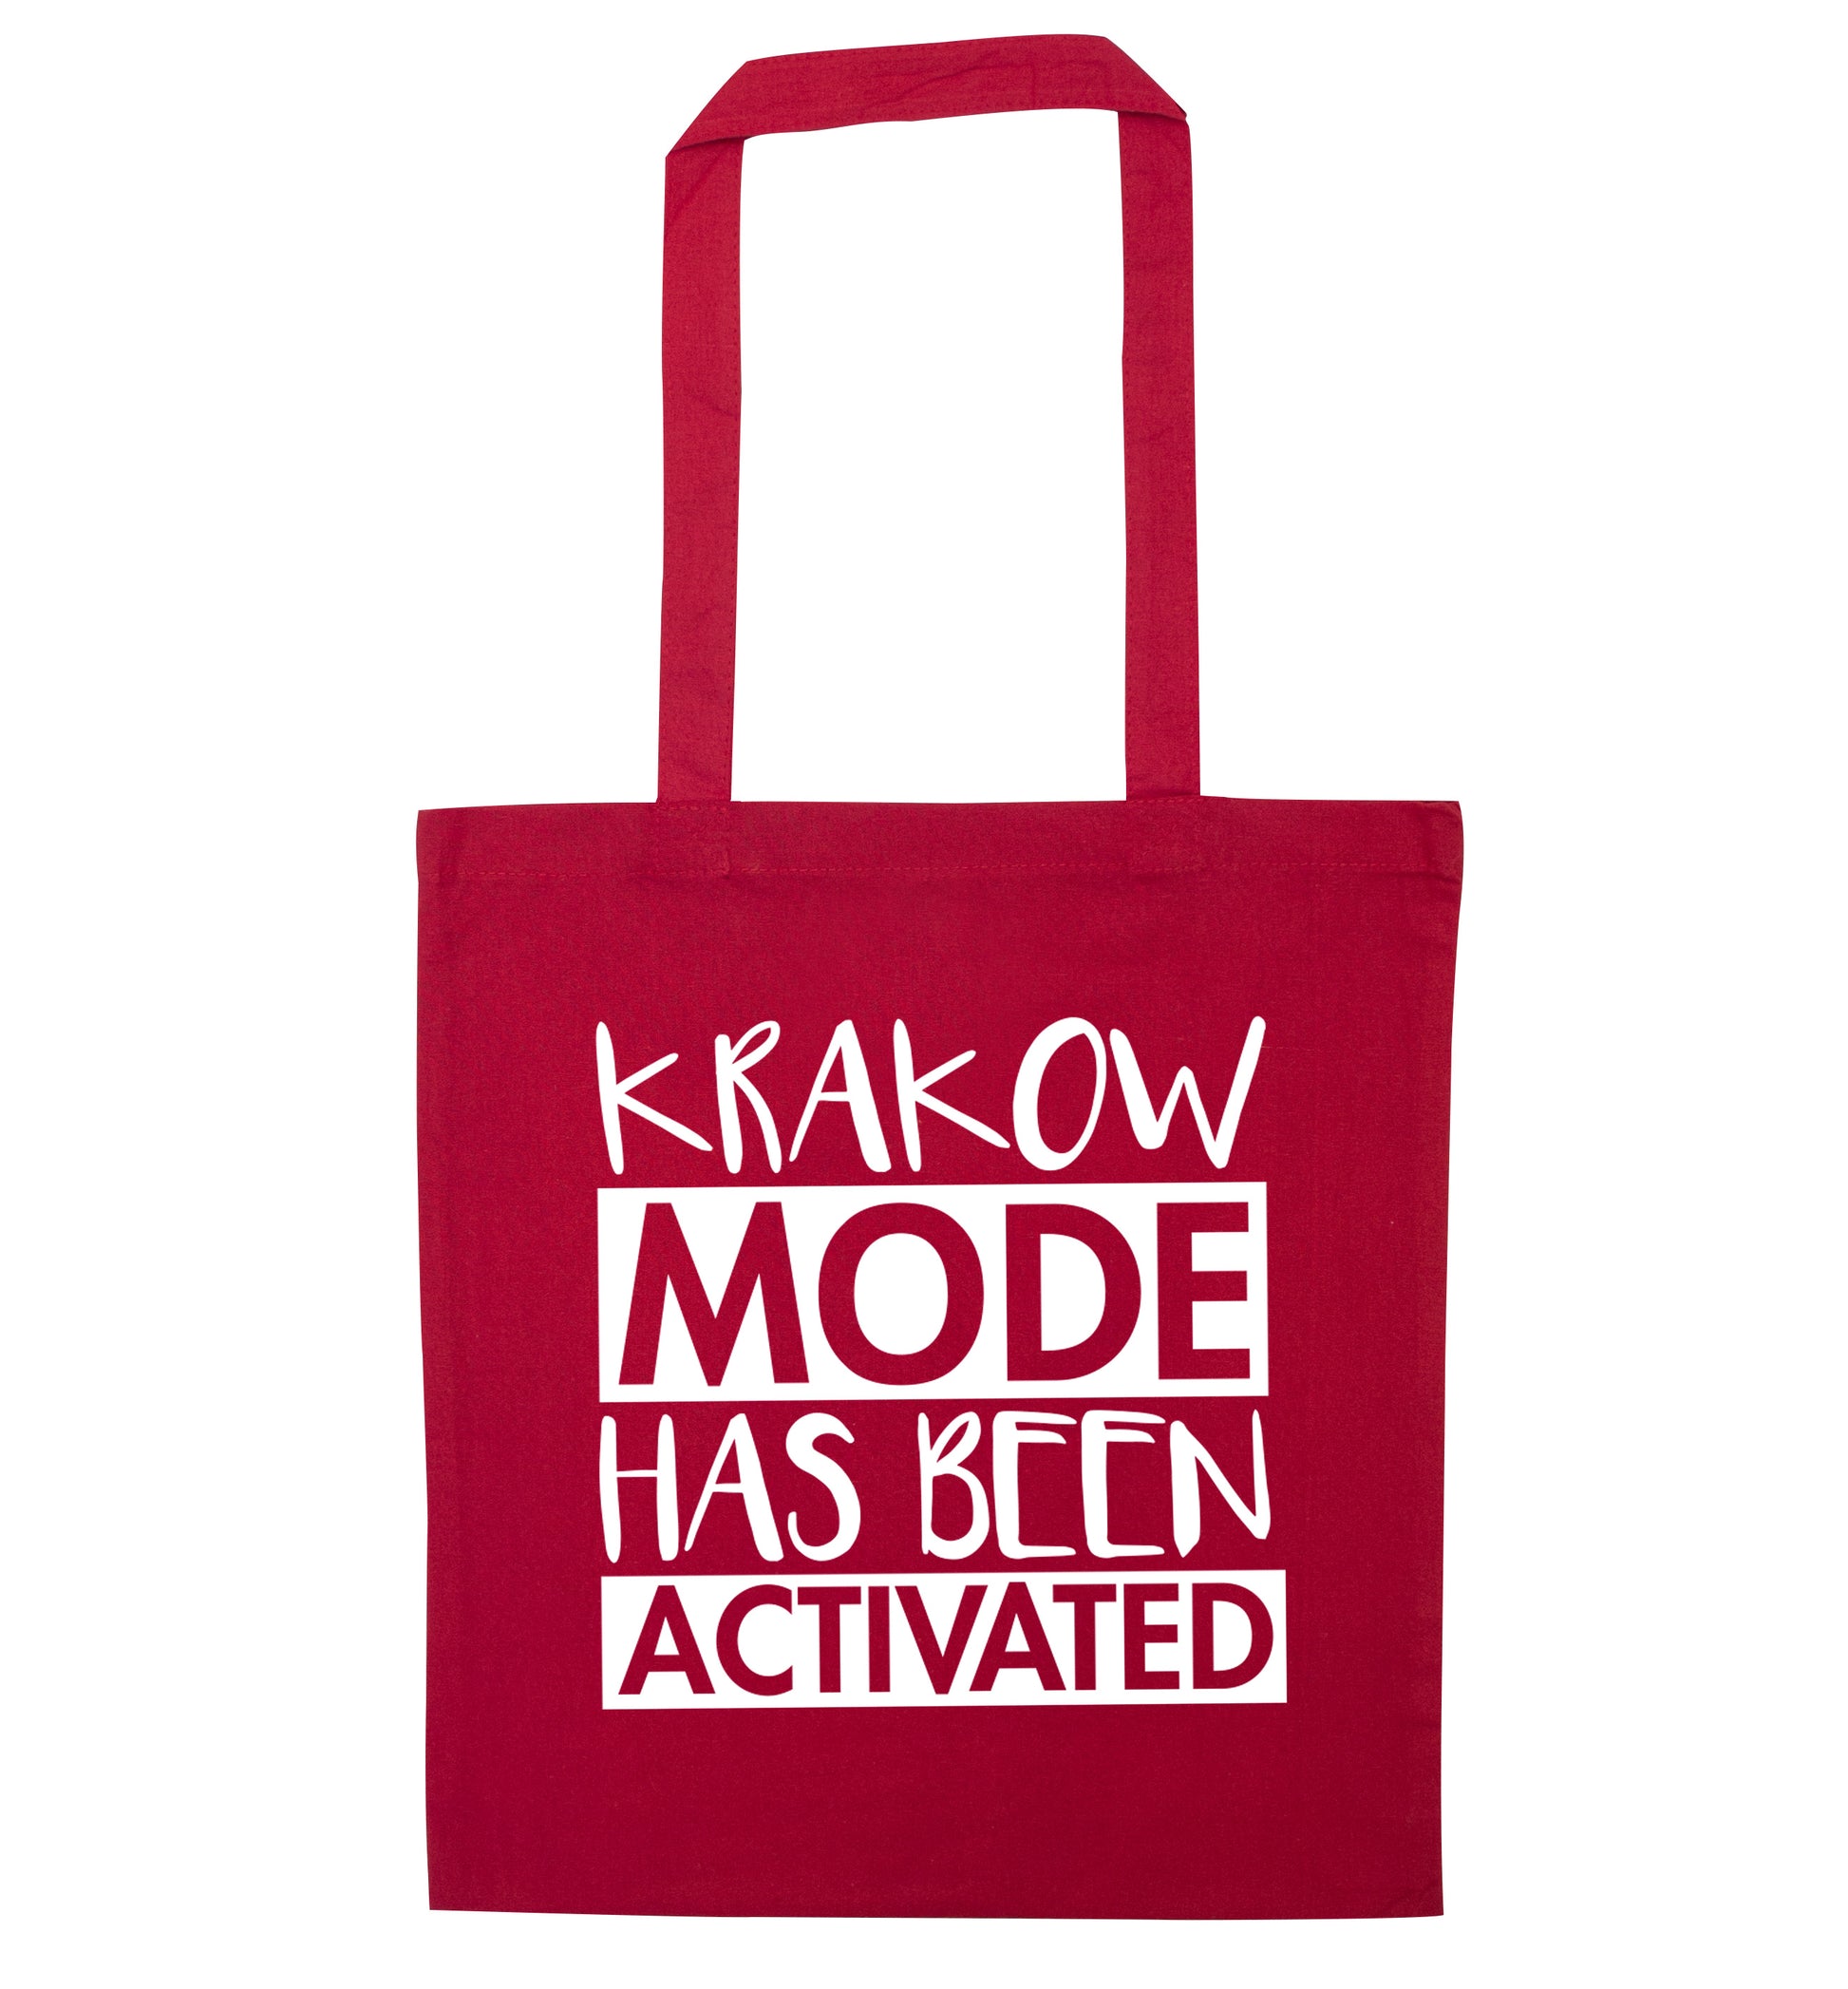 Krakow mode has been activated red tote bag